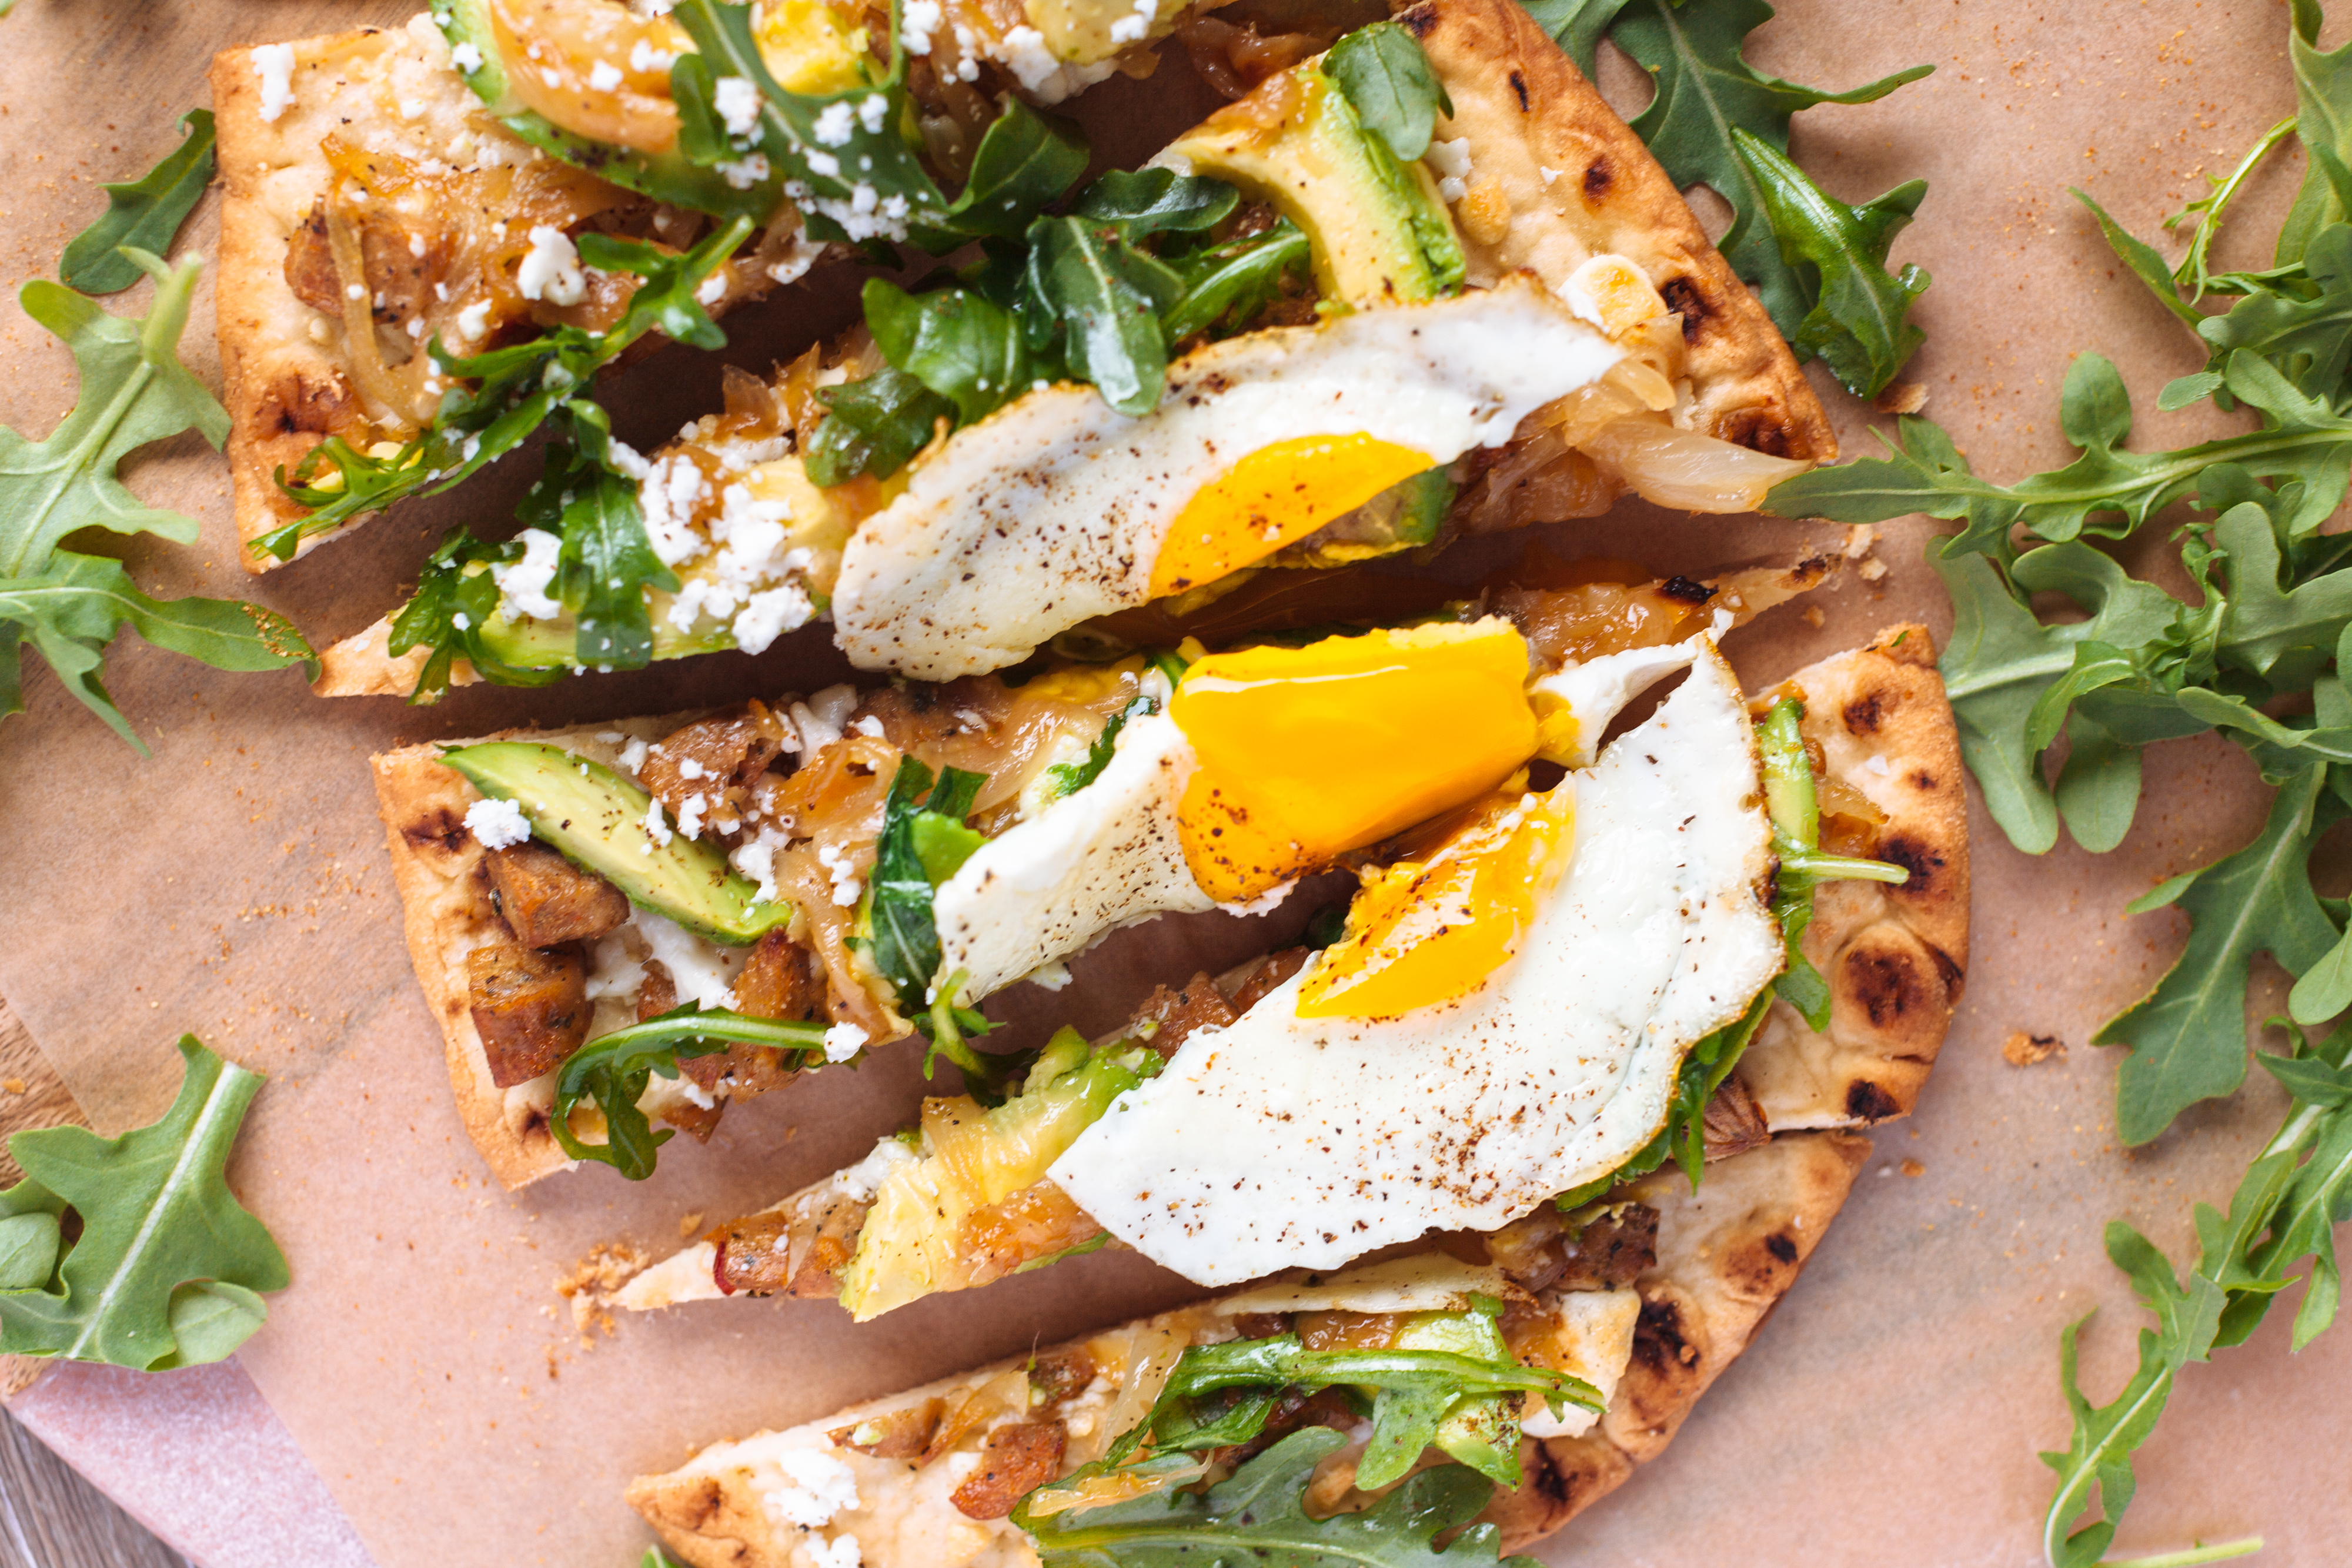 Breakfast naan pizza recipe with caramelized onions, jalapeño sausage, and queso fresco - so much yum! | bygabriella.co